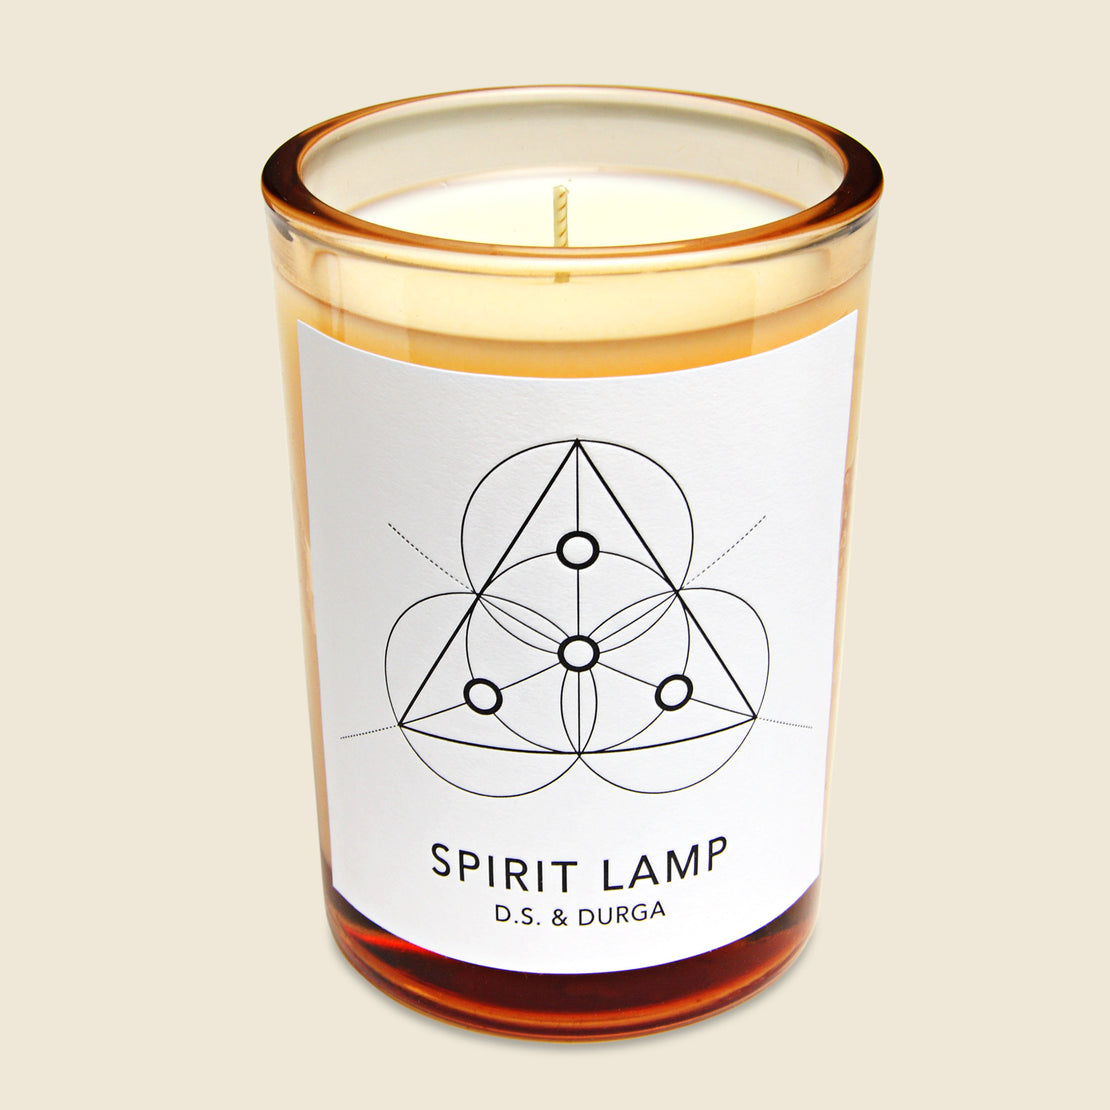 Spirit Lamp Candle - D.S. & Durga - STAG Provisions - Home - Fragrance - Candle